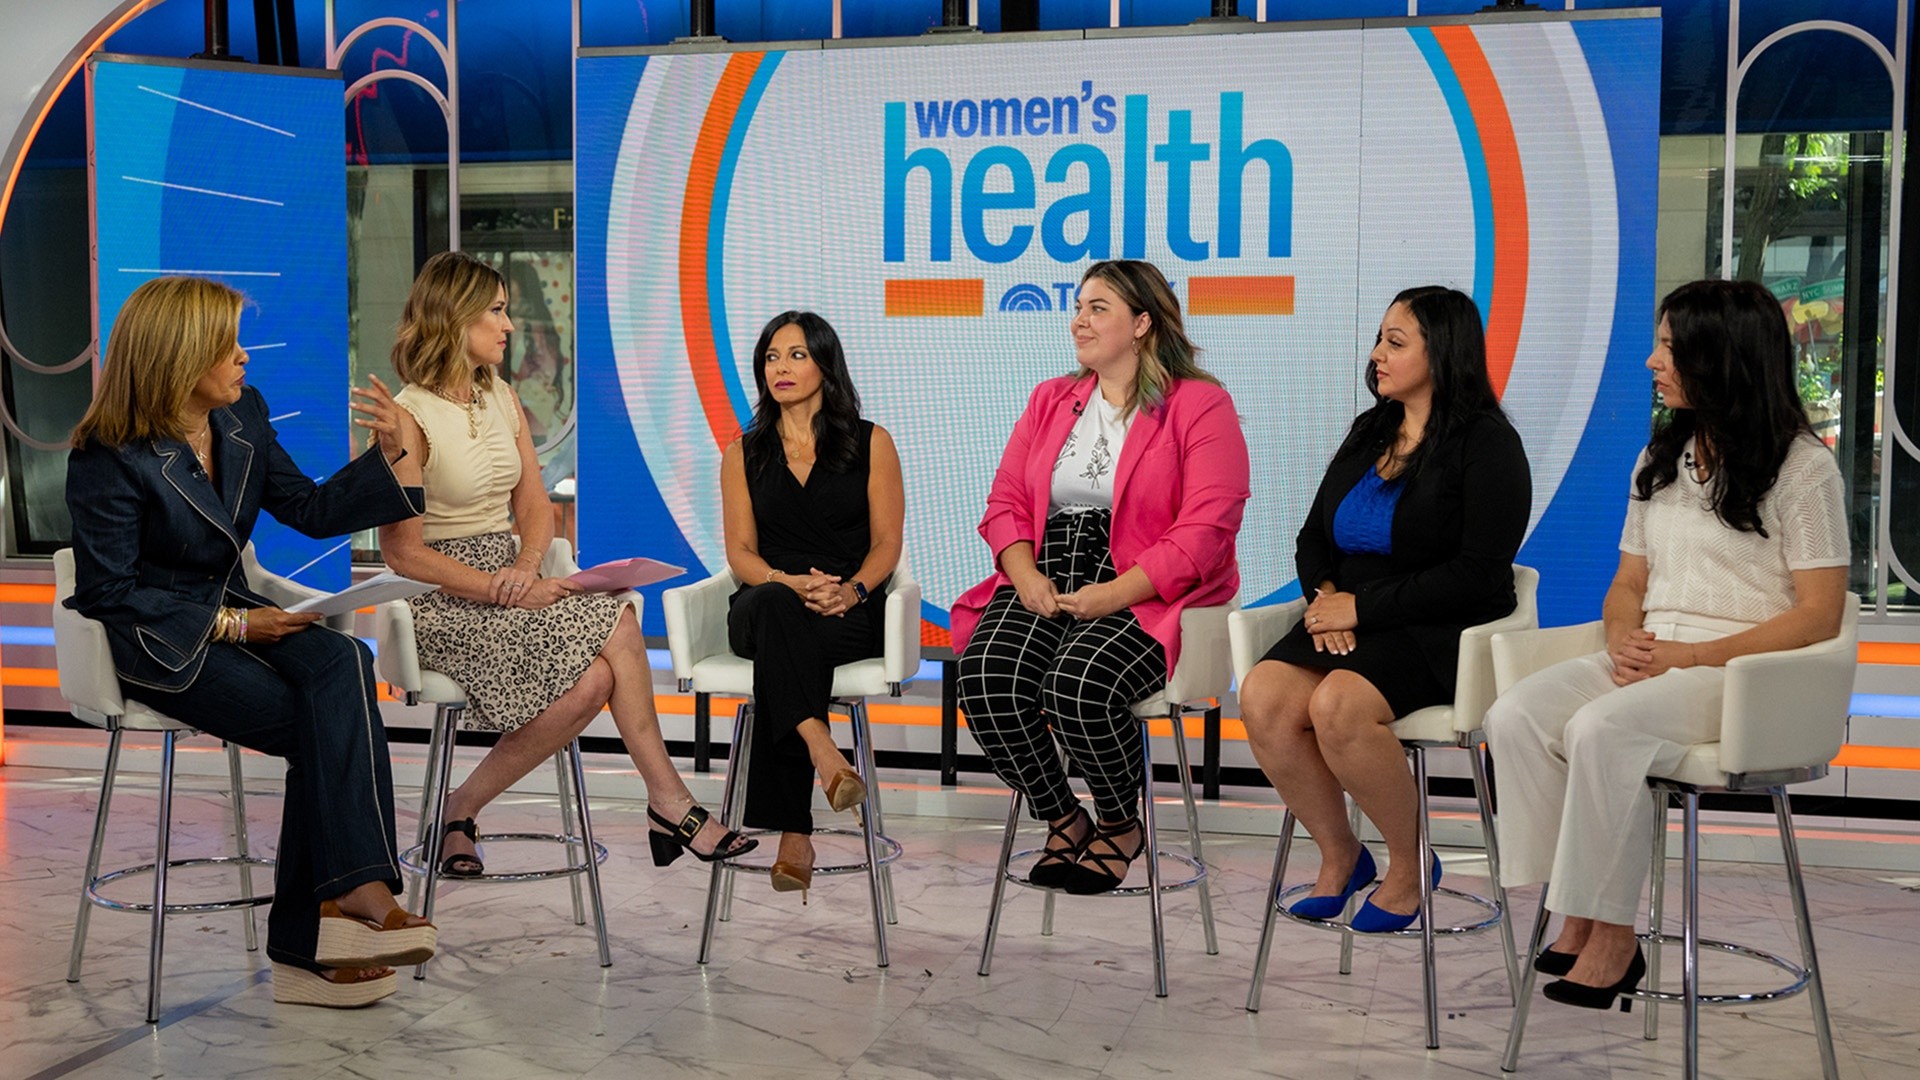 Women open up on pushing for diagnosis during health challenges